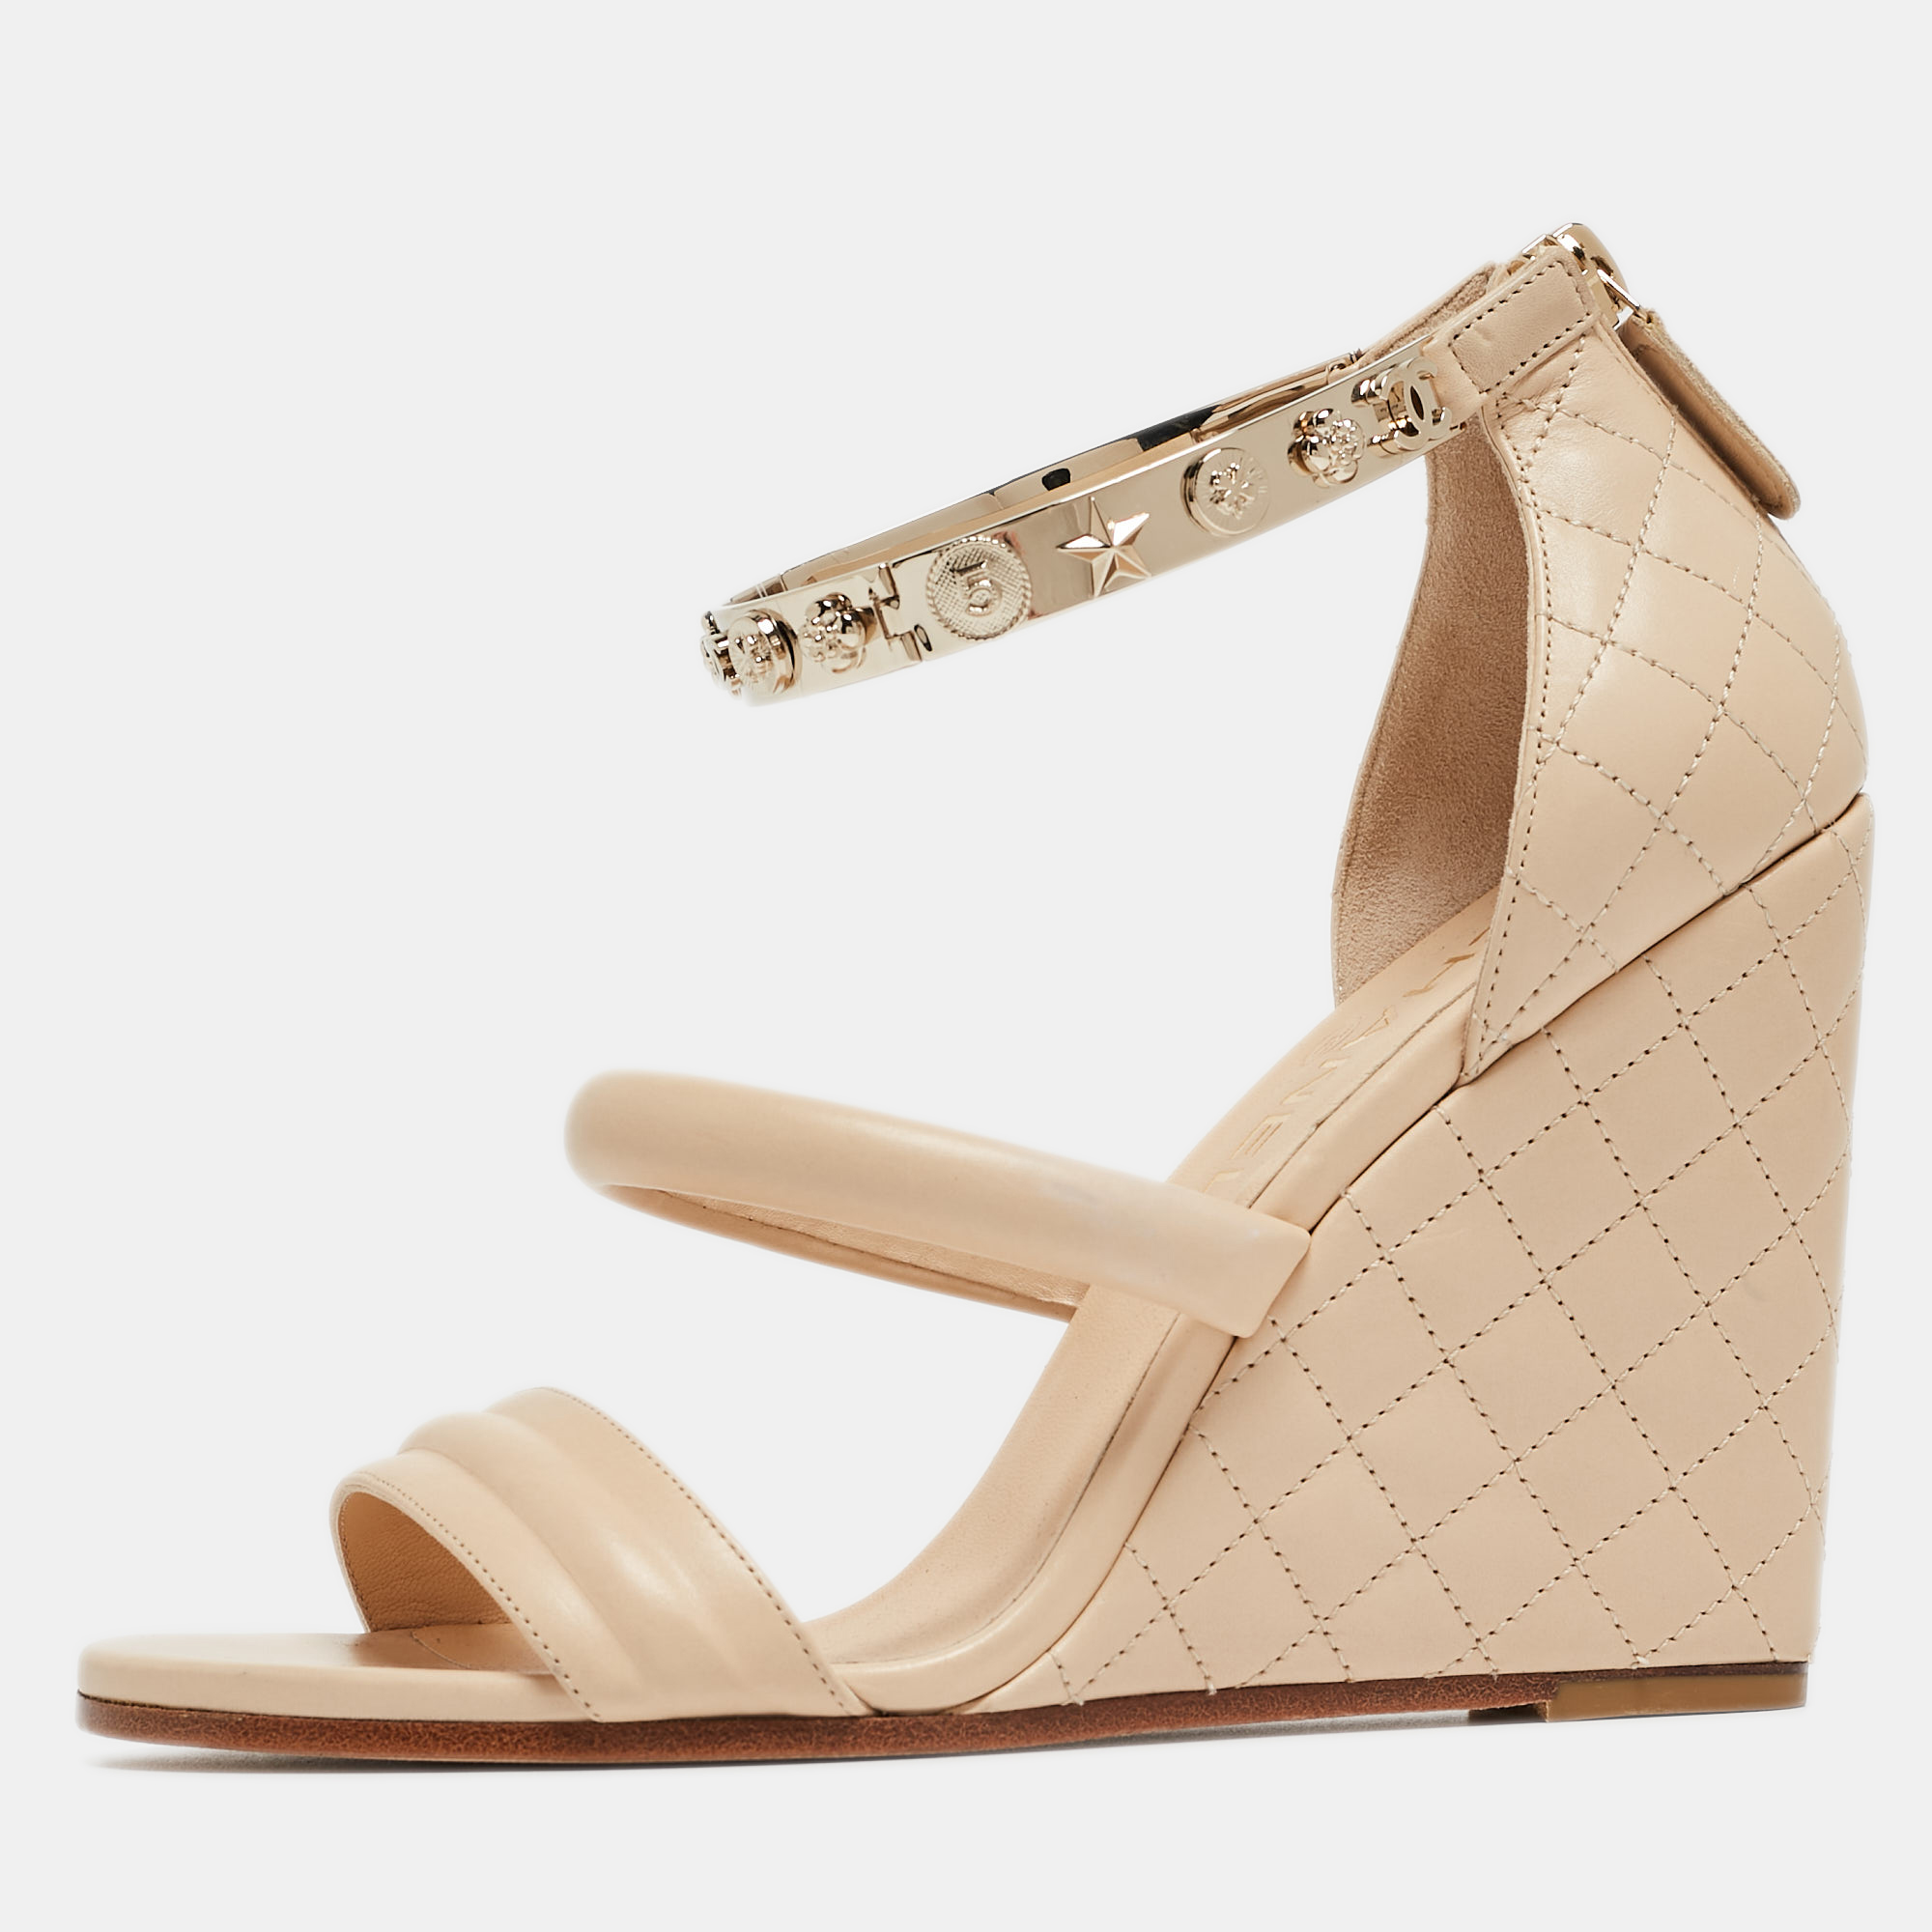 Chanel Beige Quilted Leather Charm Embellished Ankle Cuff Wedge Sandals Size 39